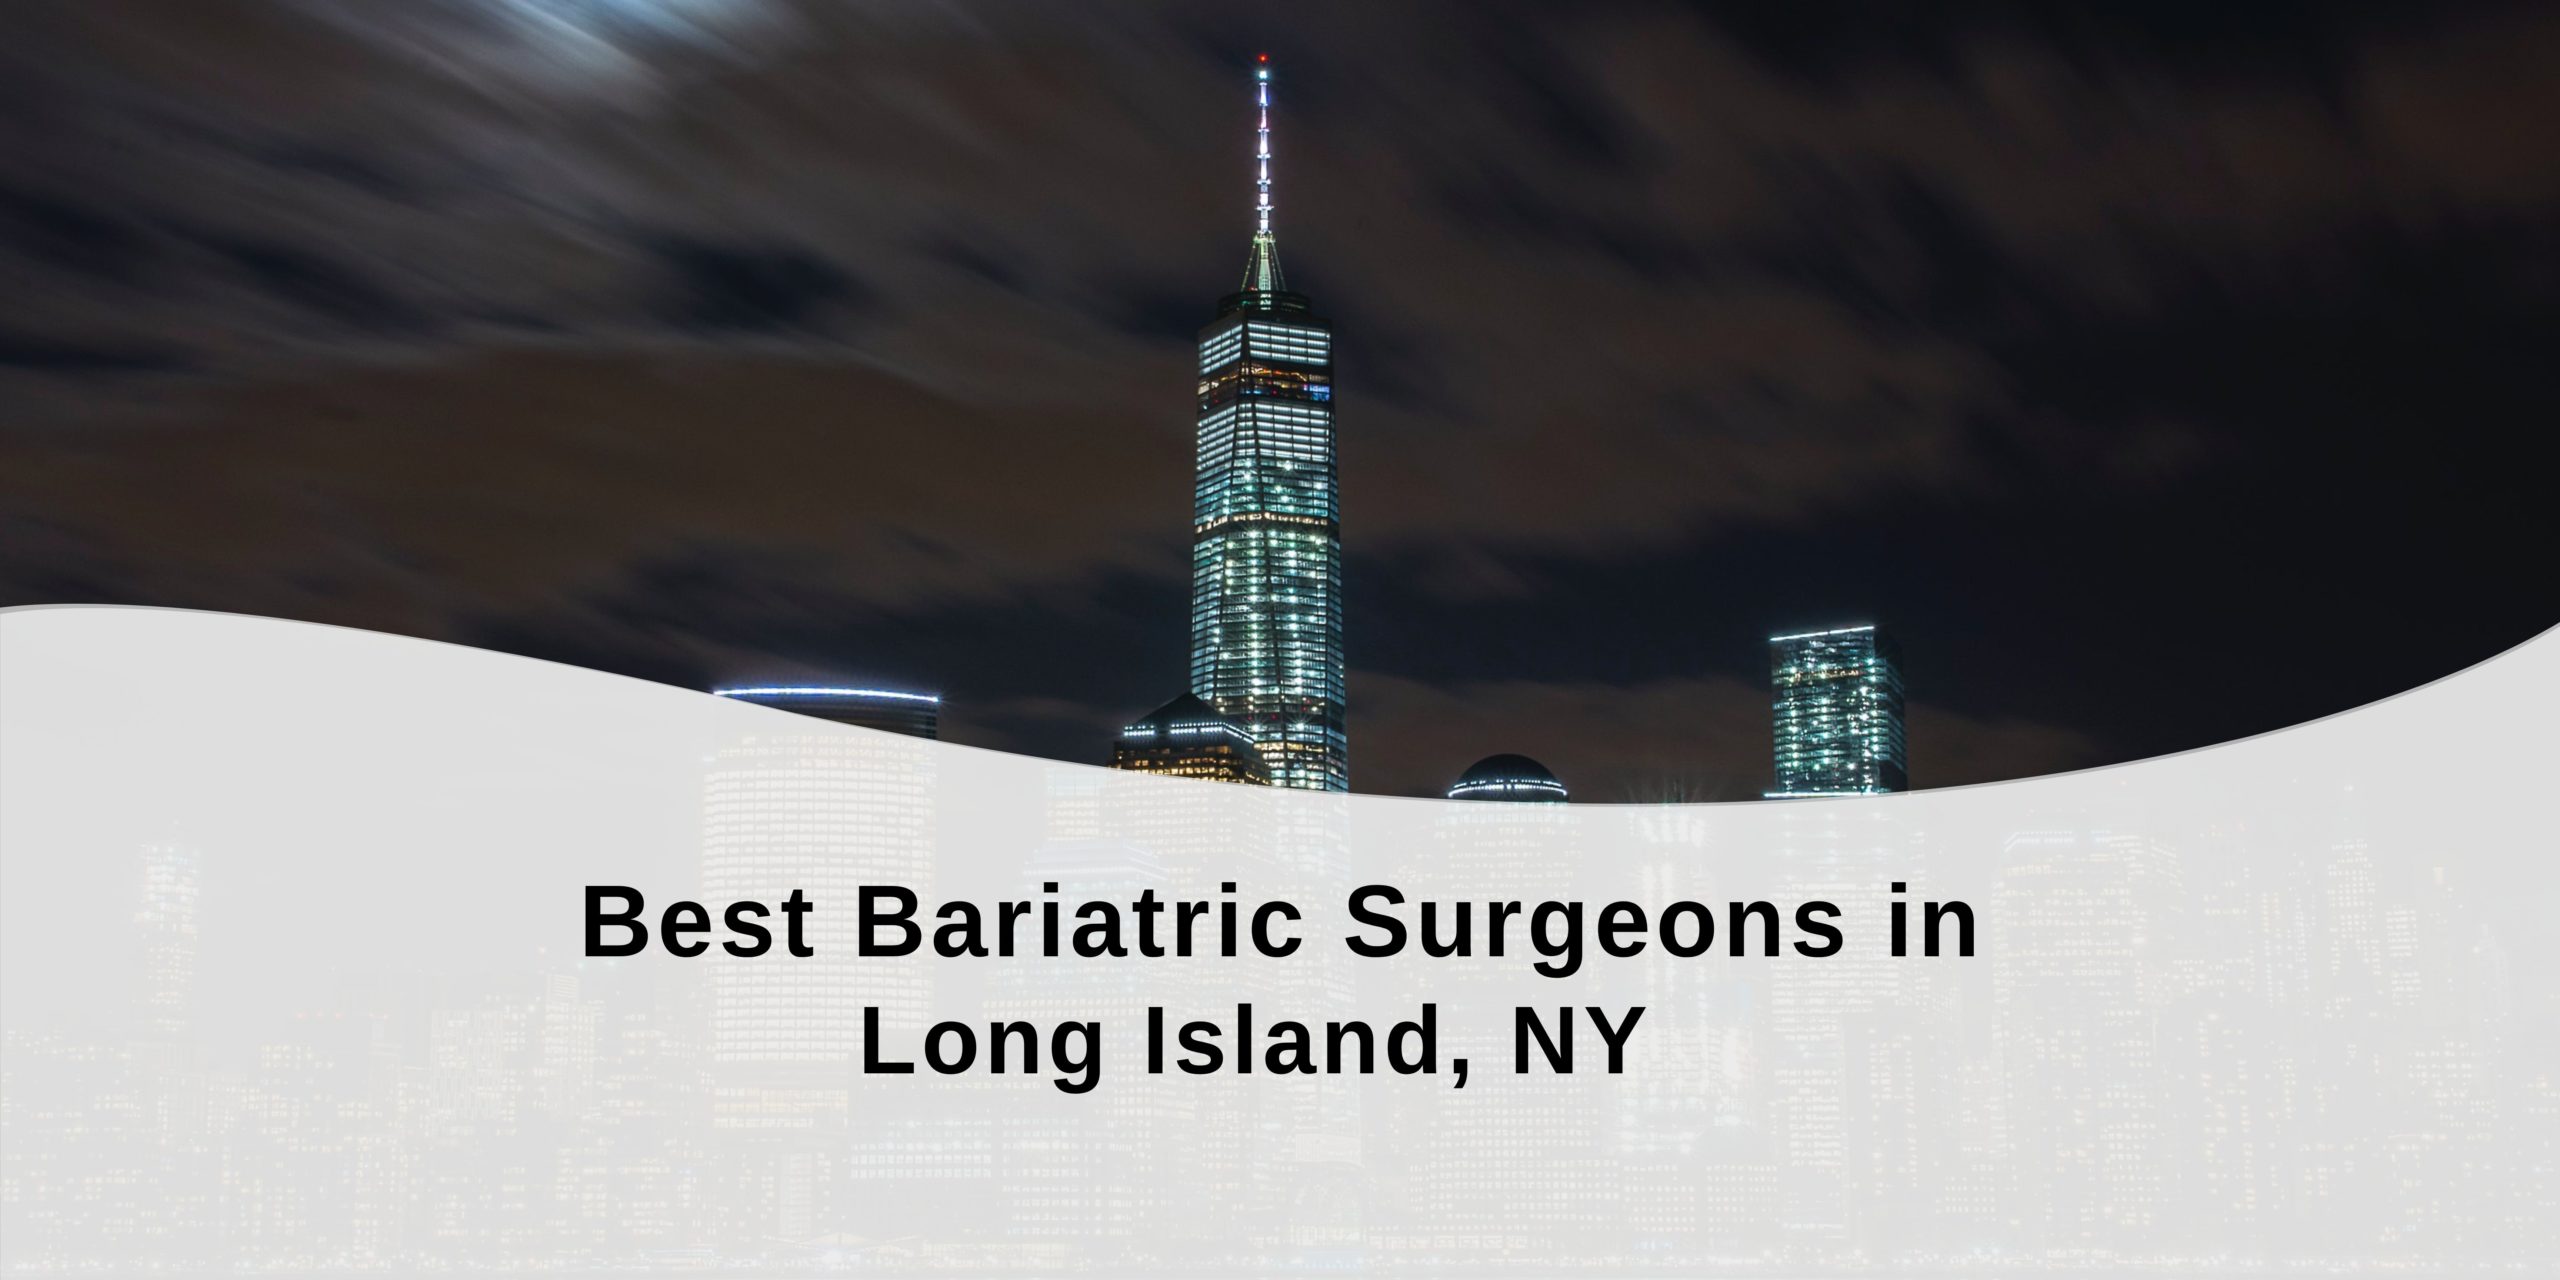 Best bariatric surgeons in long island, NY